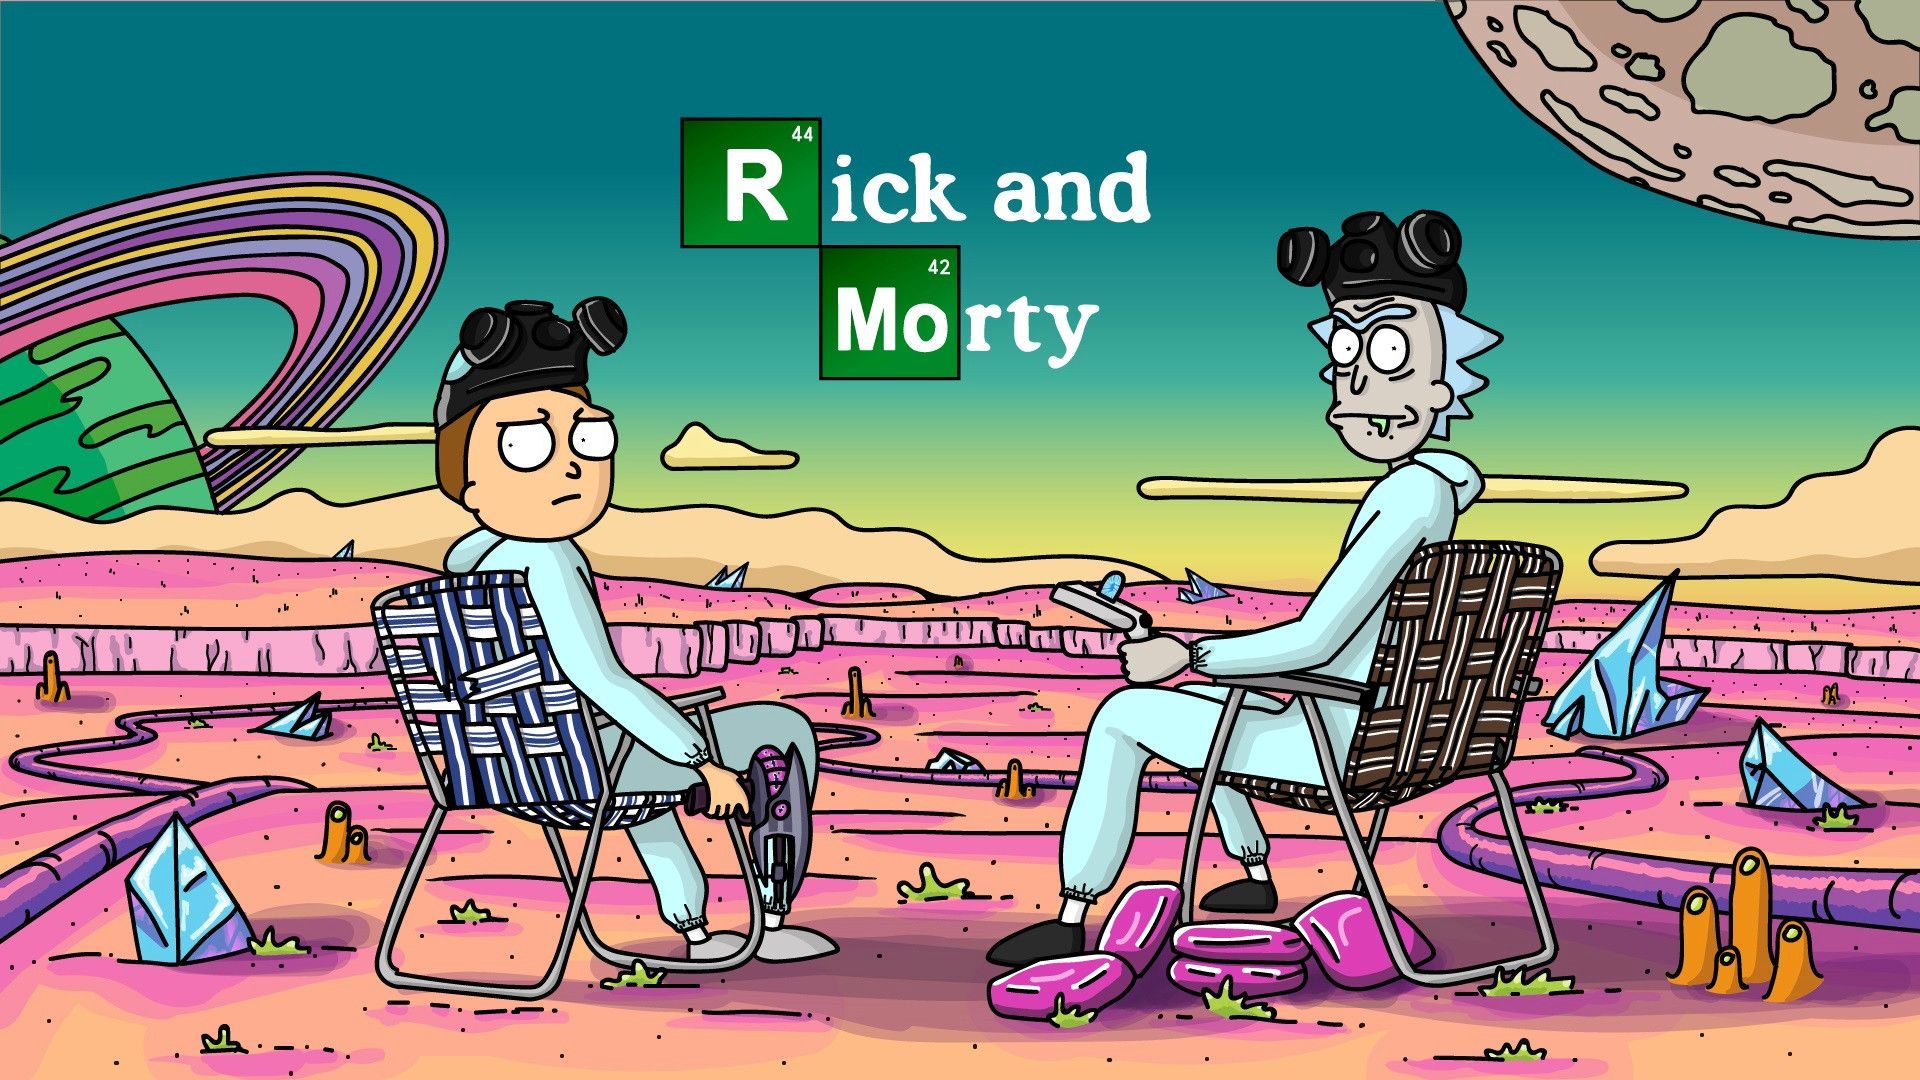 Download Rick And Morty Wallpaper Awesome 71 Best Rick And Morty